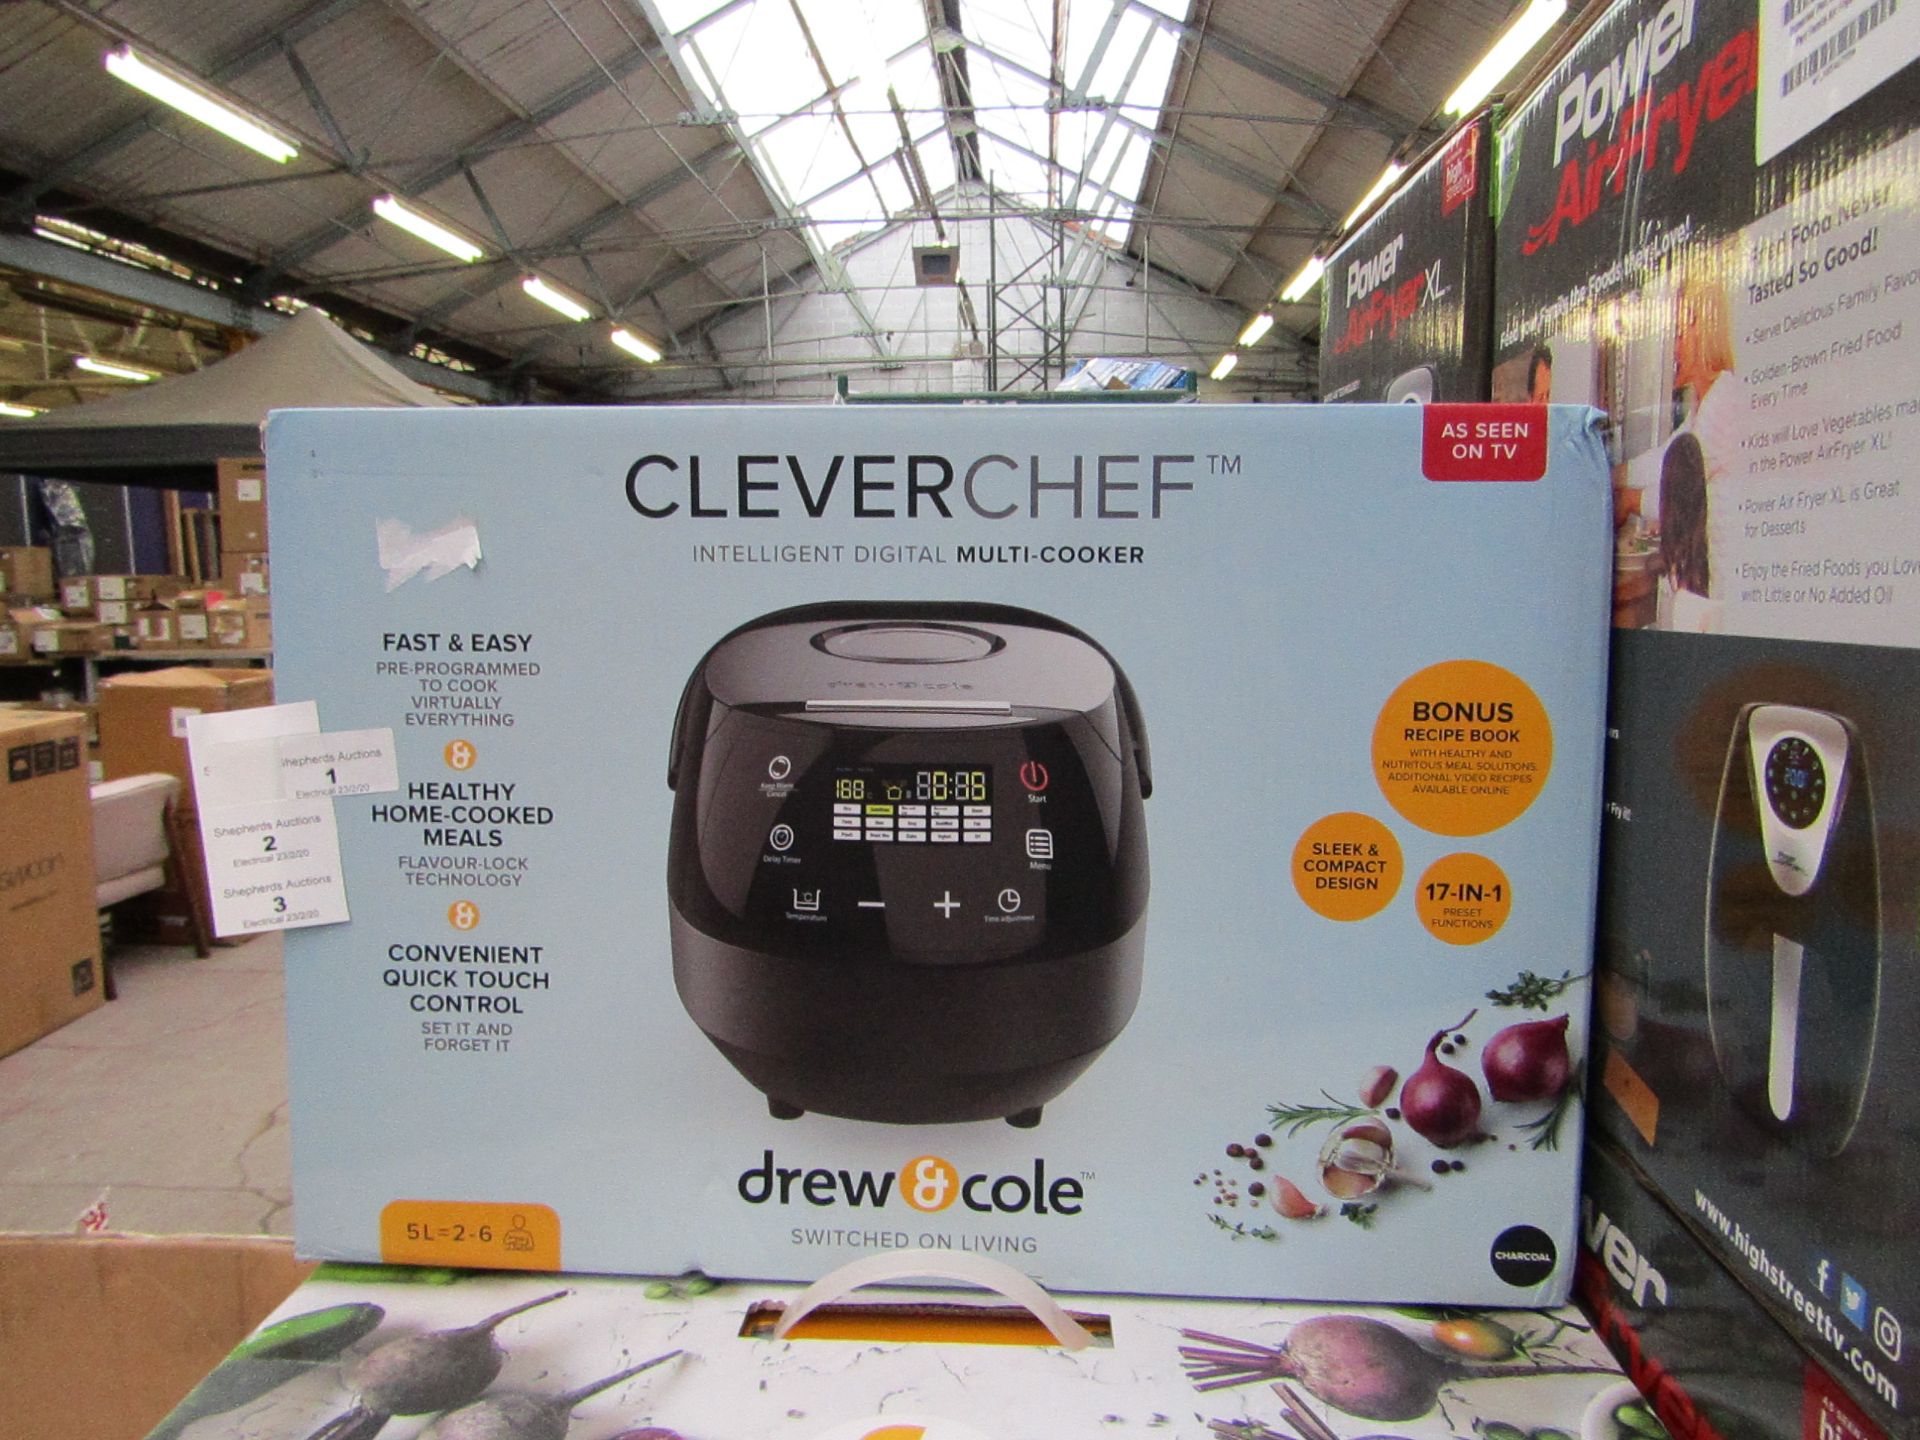 | 1x | DREW & COLE CLEVERCHEF | PAT TESTED AND BOXED | NO ONLINE RE-SALE | SKU C5060541511682 |